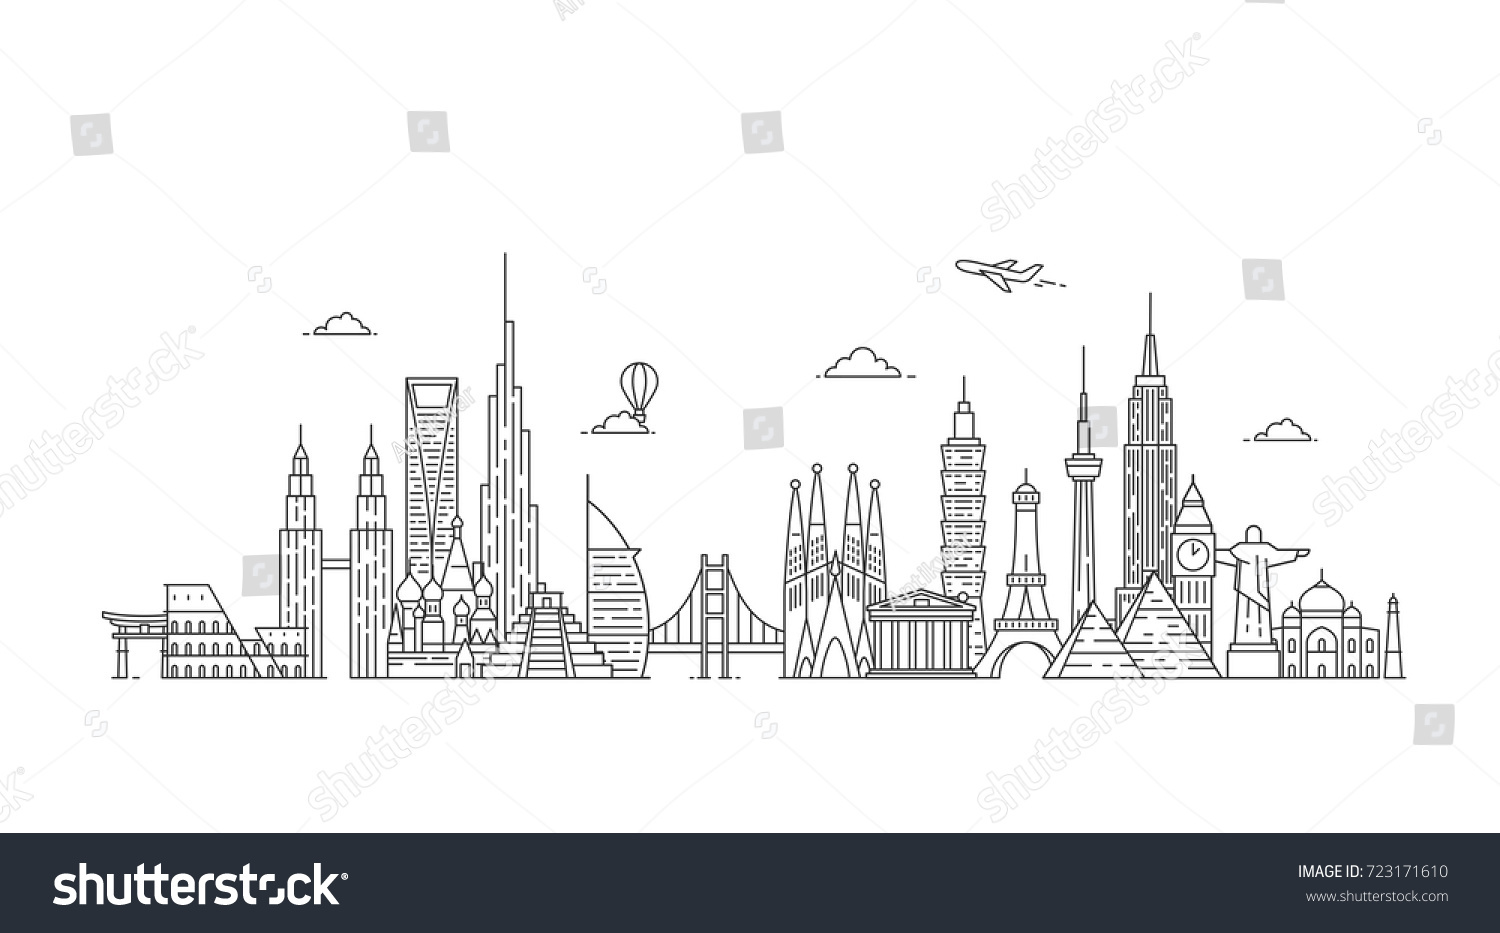 World skyline. Travel and tourism background. Famous buildings and monuments. #723171610